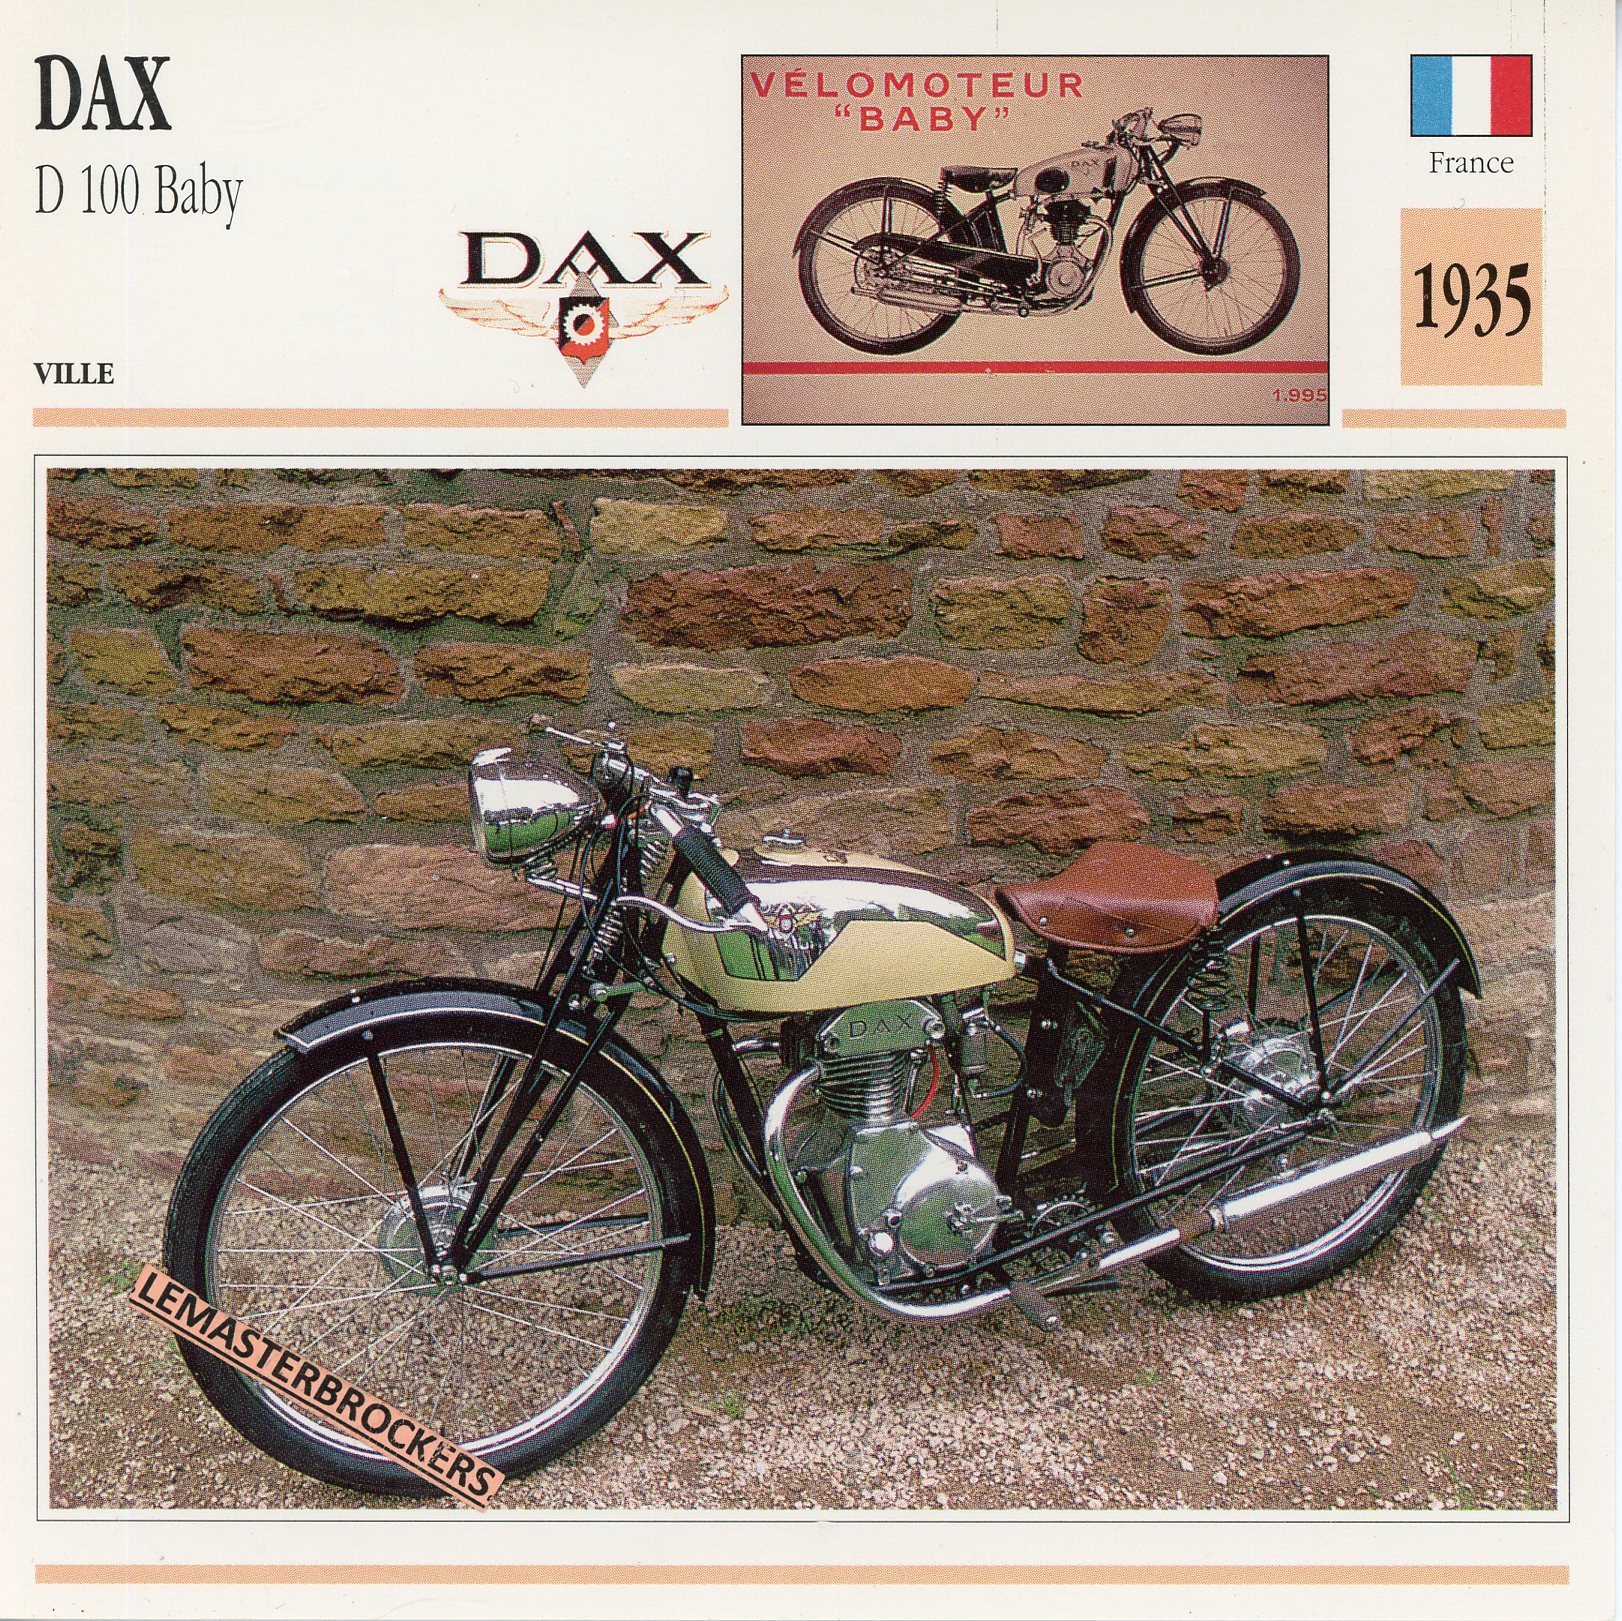 DAX-D100-BABY-1935-FICHE-MOTO-MOTORCYCLE-CARDS-ATLAS-LEMASTERBROCKERS